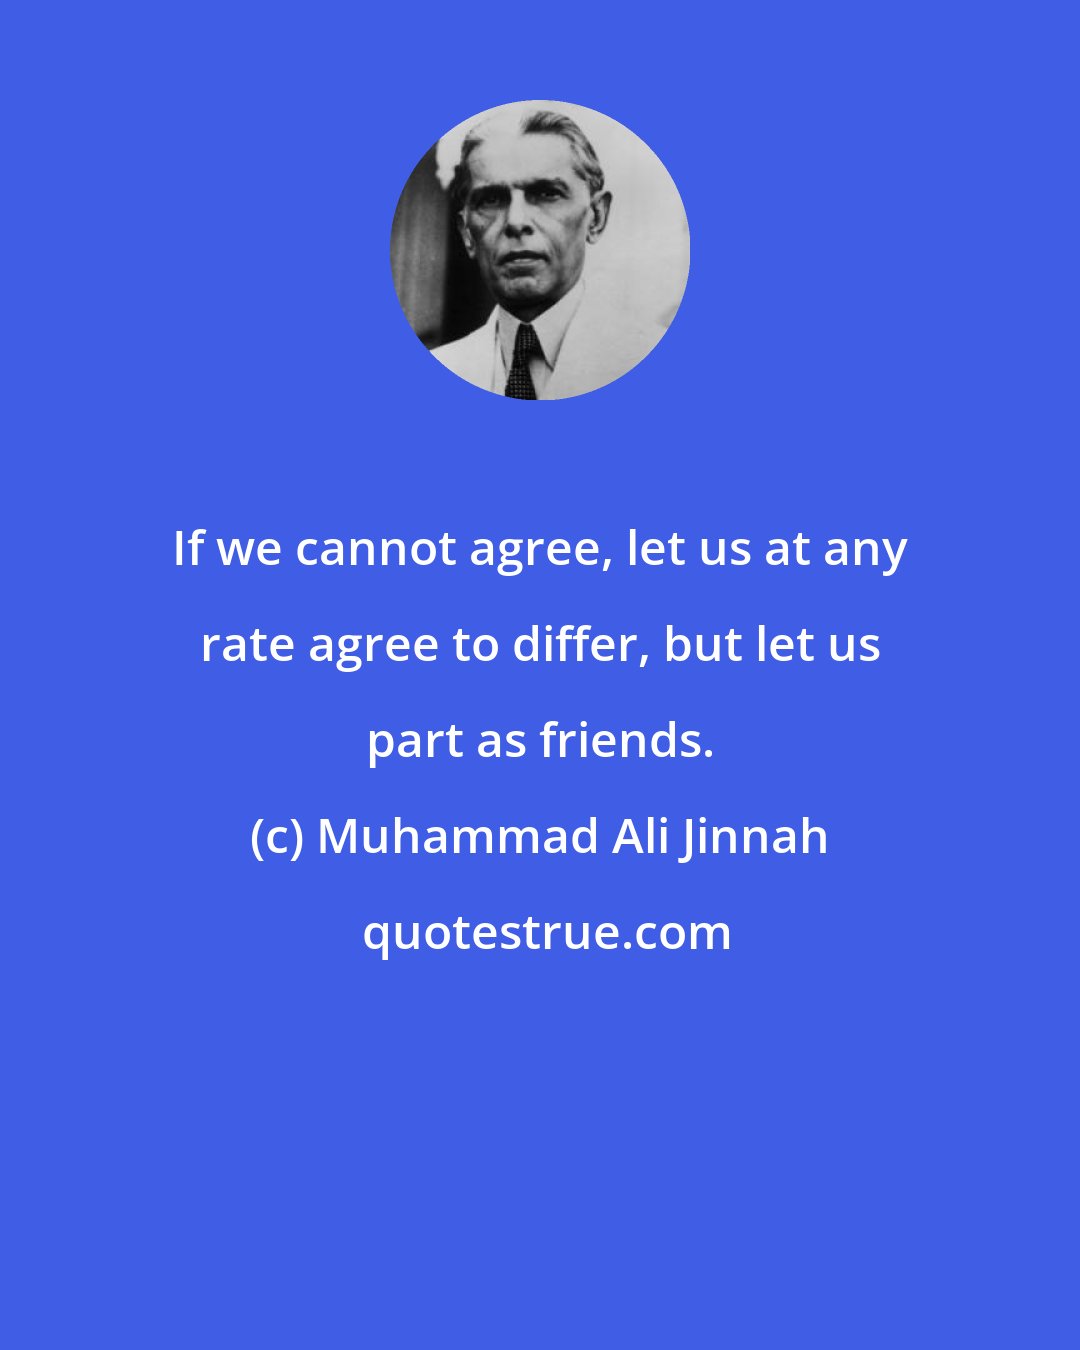 Muhammad Ali Jinnah: If we cannot agree, let us at any rate agree to differ, but let us part as friends.